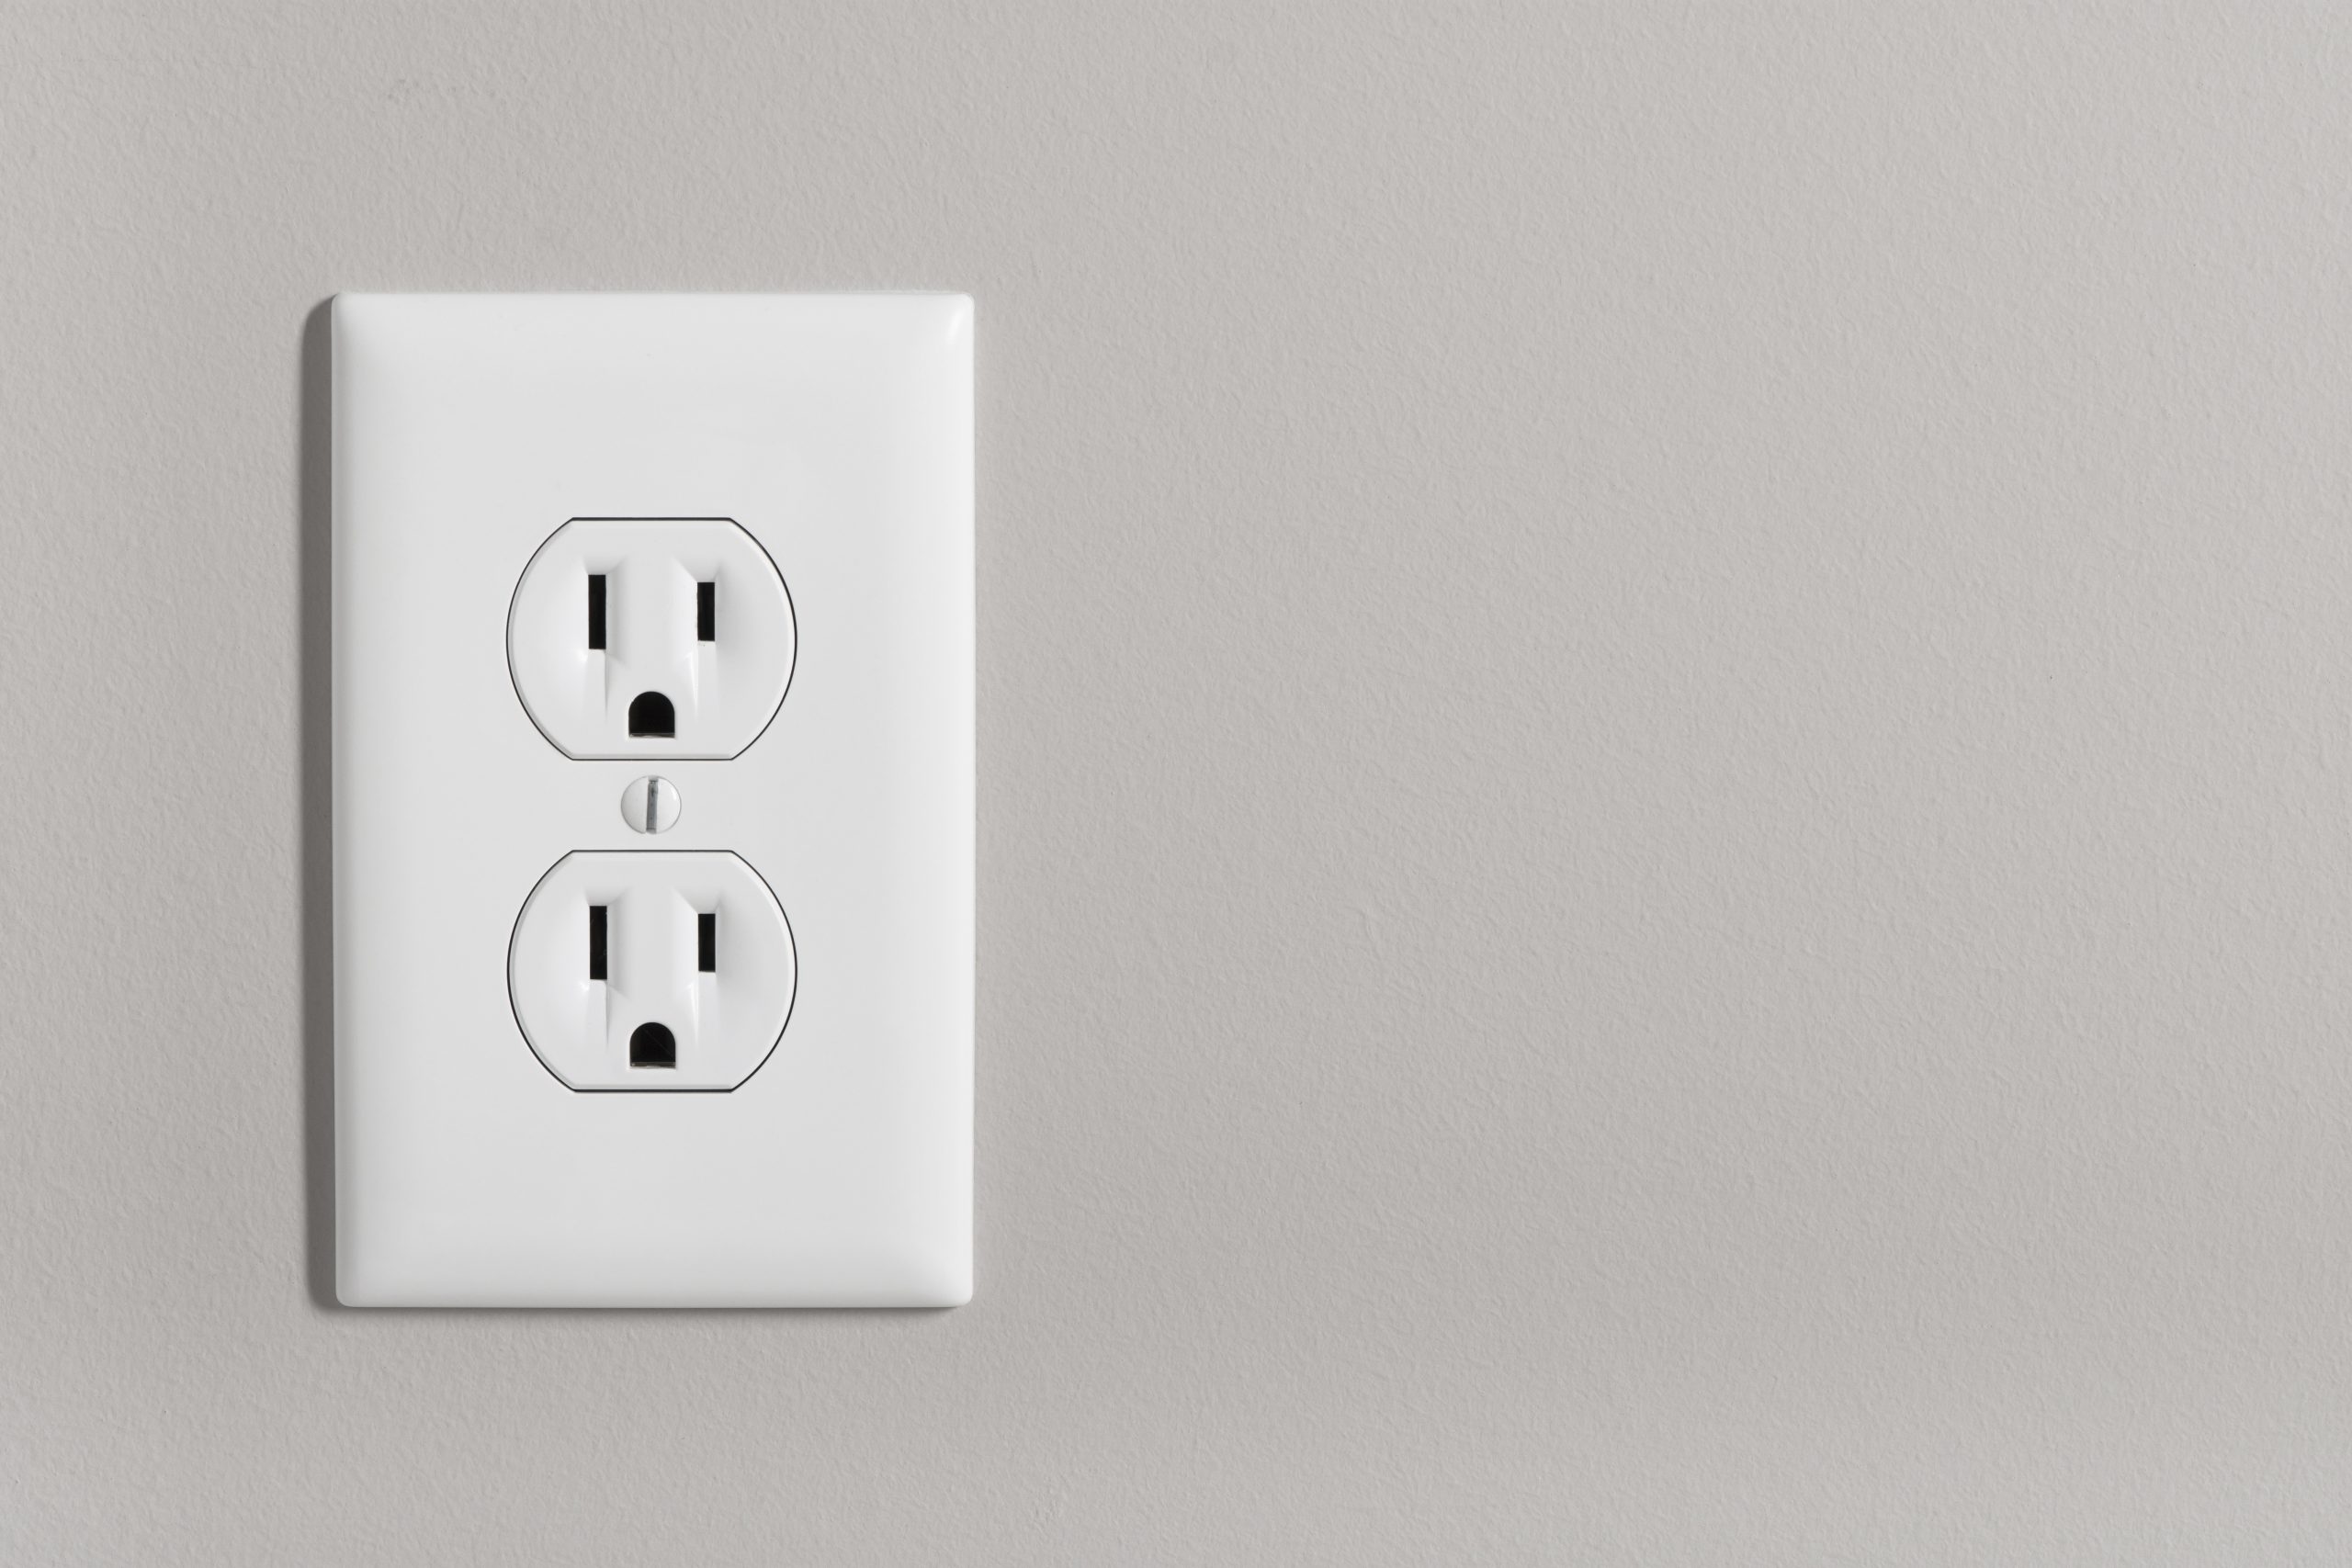 Outlet Repair vs. Replacement: Which is Best?